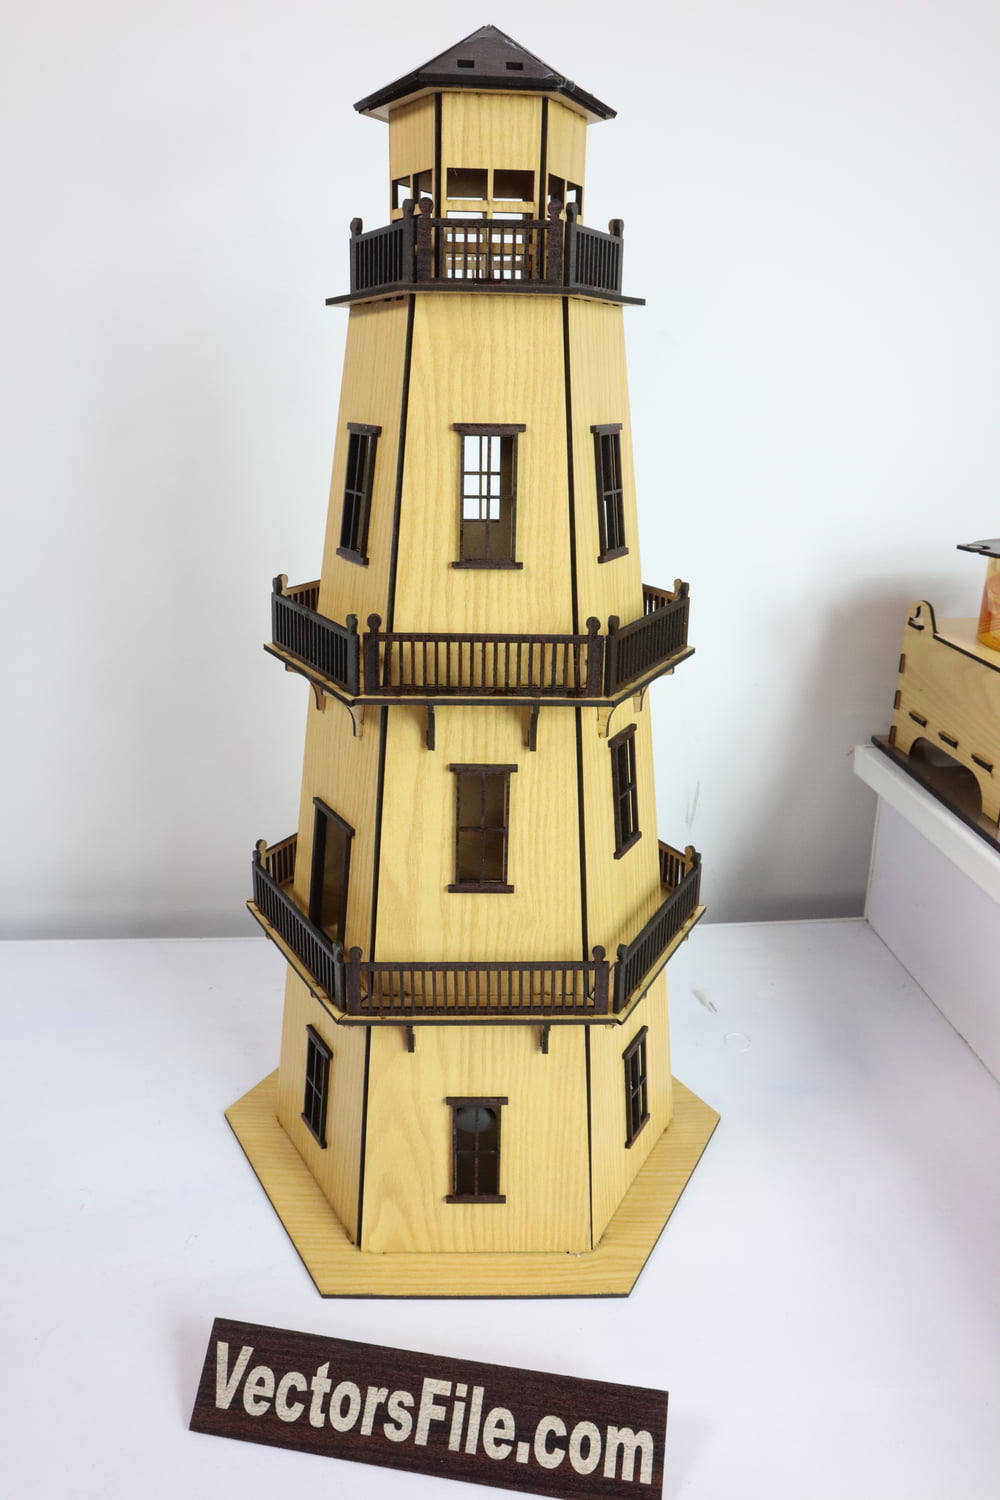 Wooden Cut MDF Light Tower Model Light House Architectural Design Free Vector File